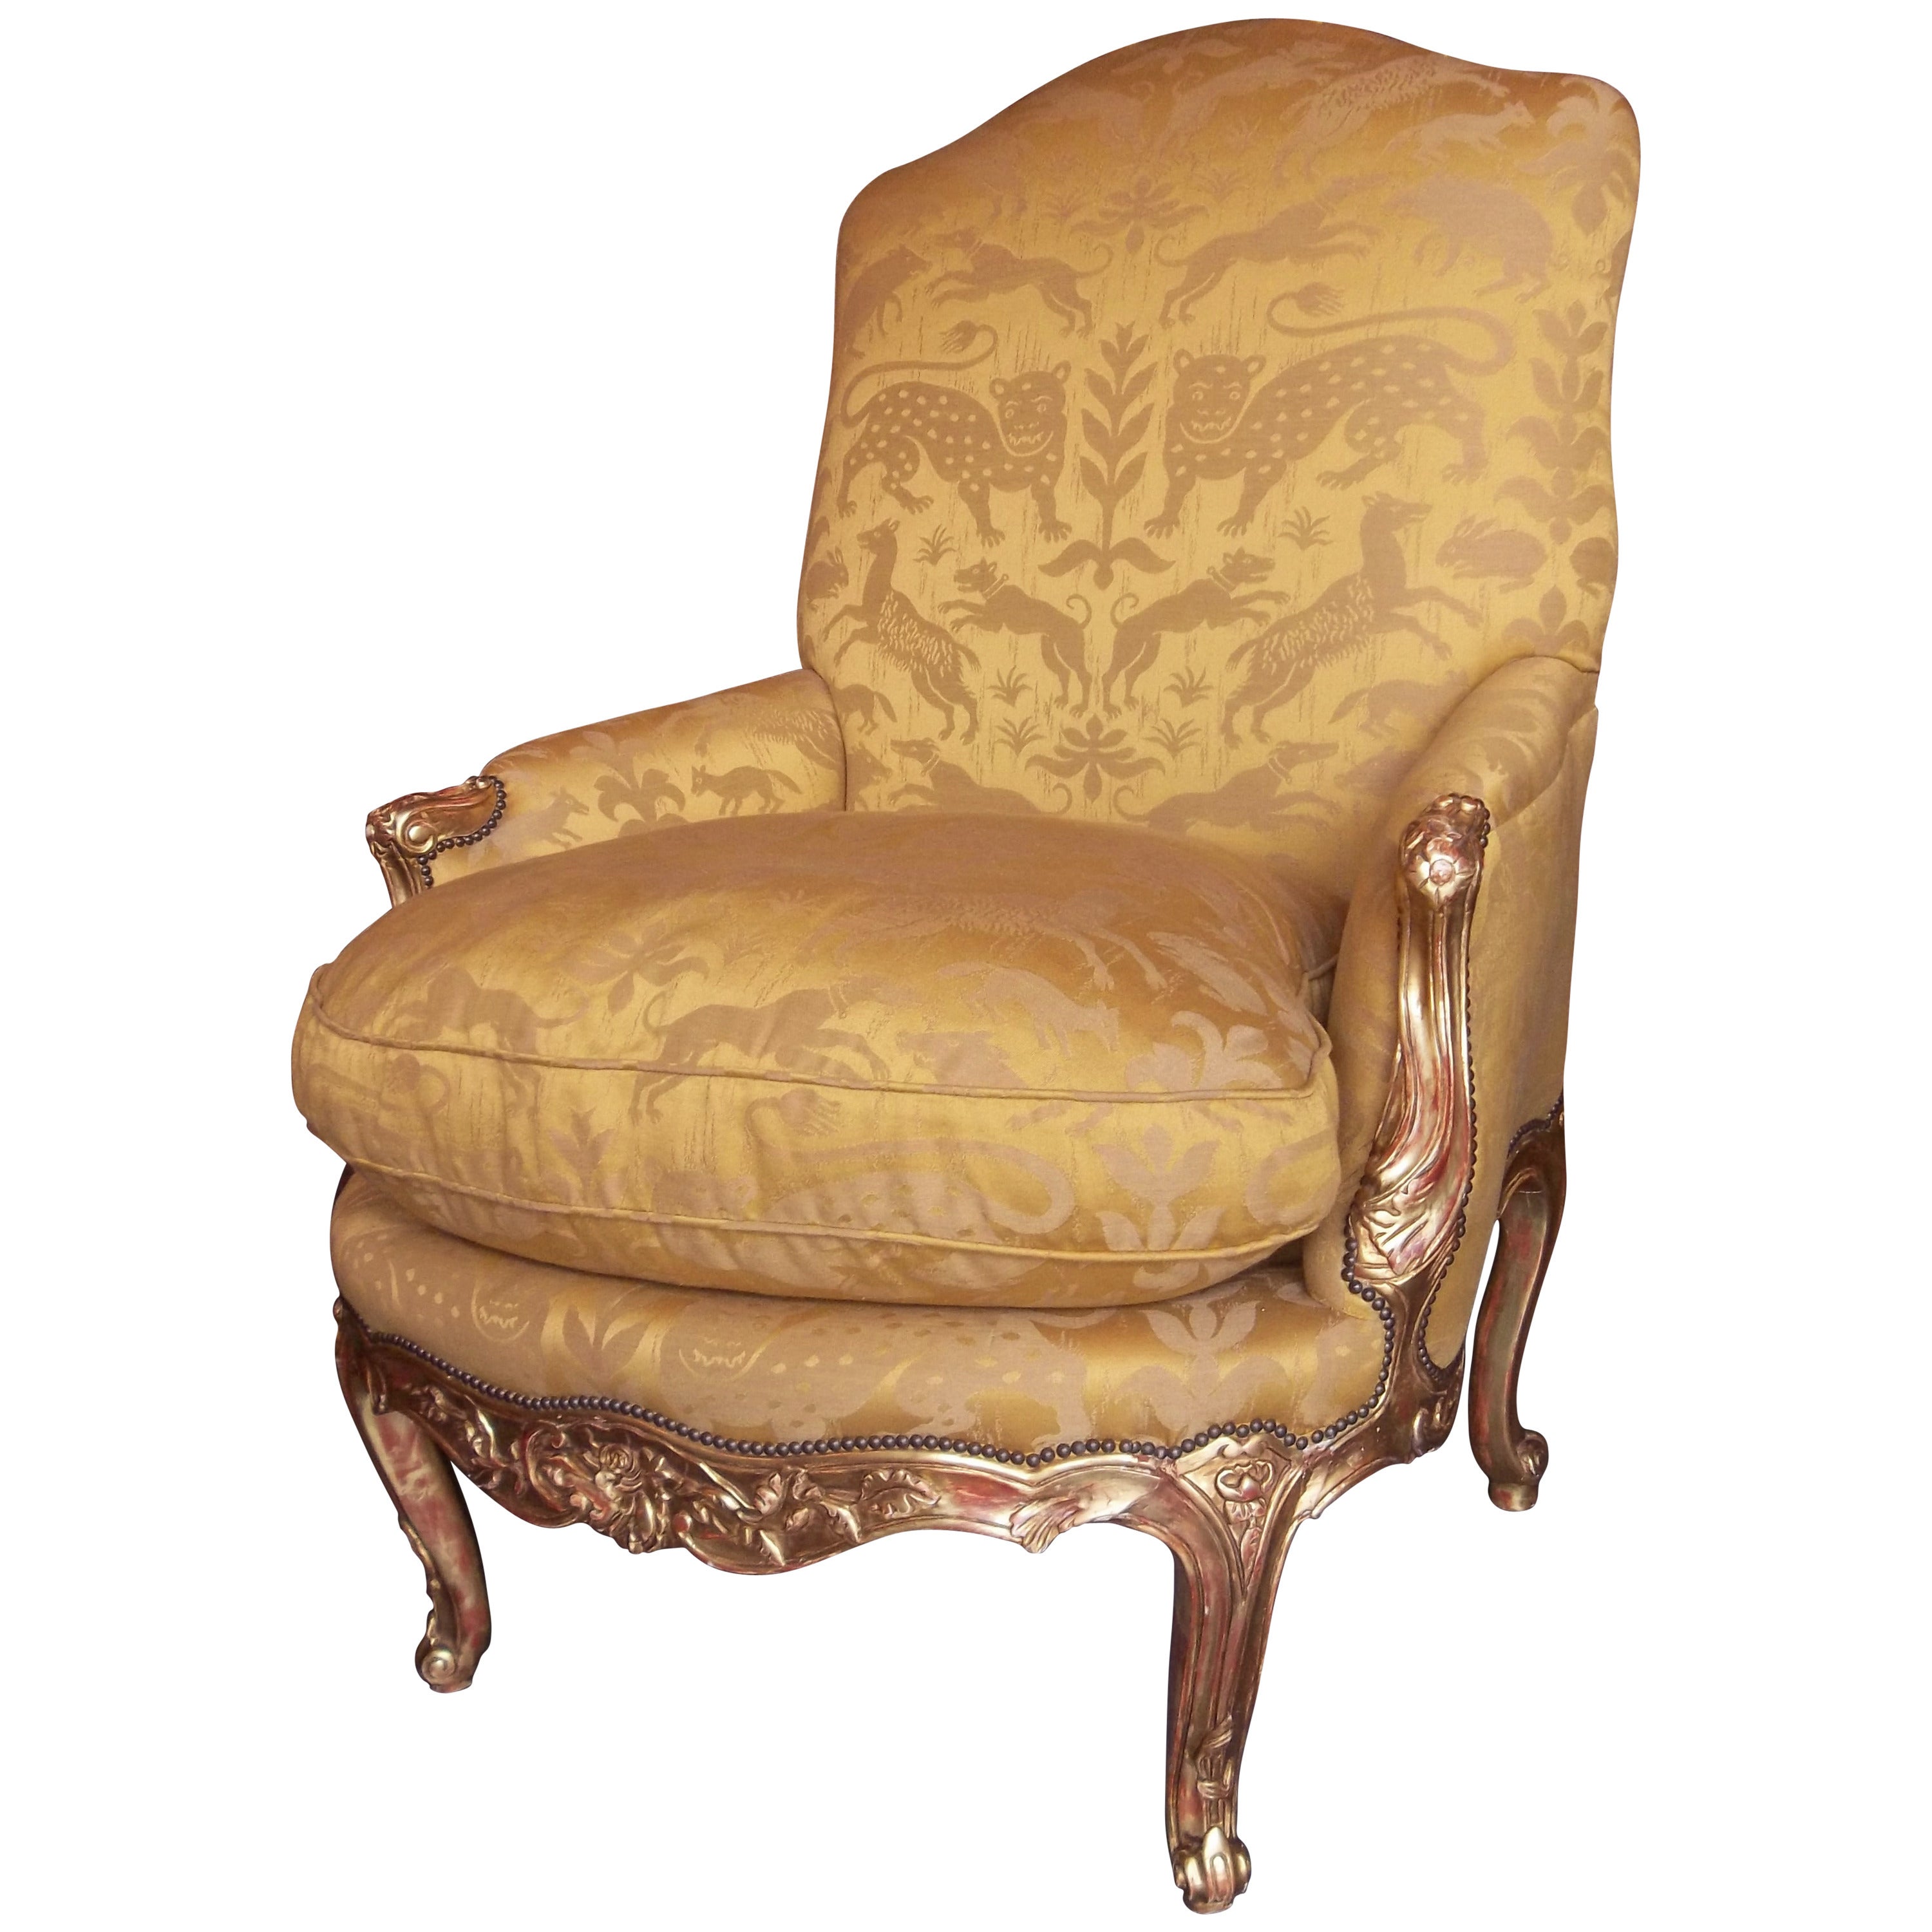 Oversized Louis XV Styled Giltwood Bergere or Armchair